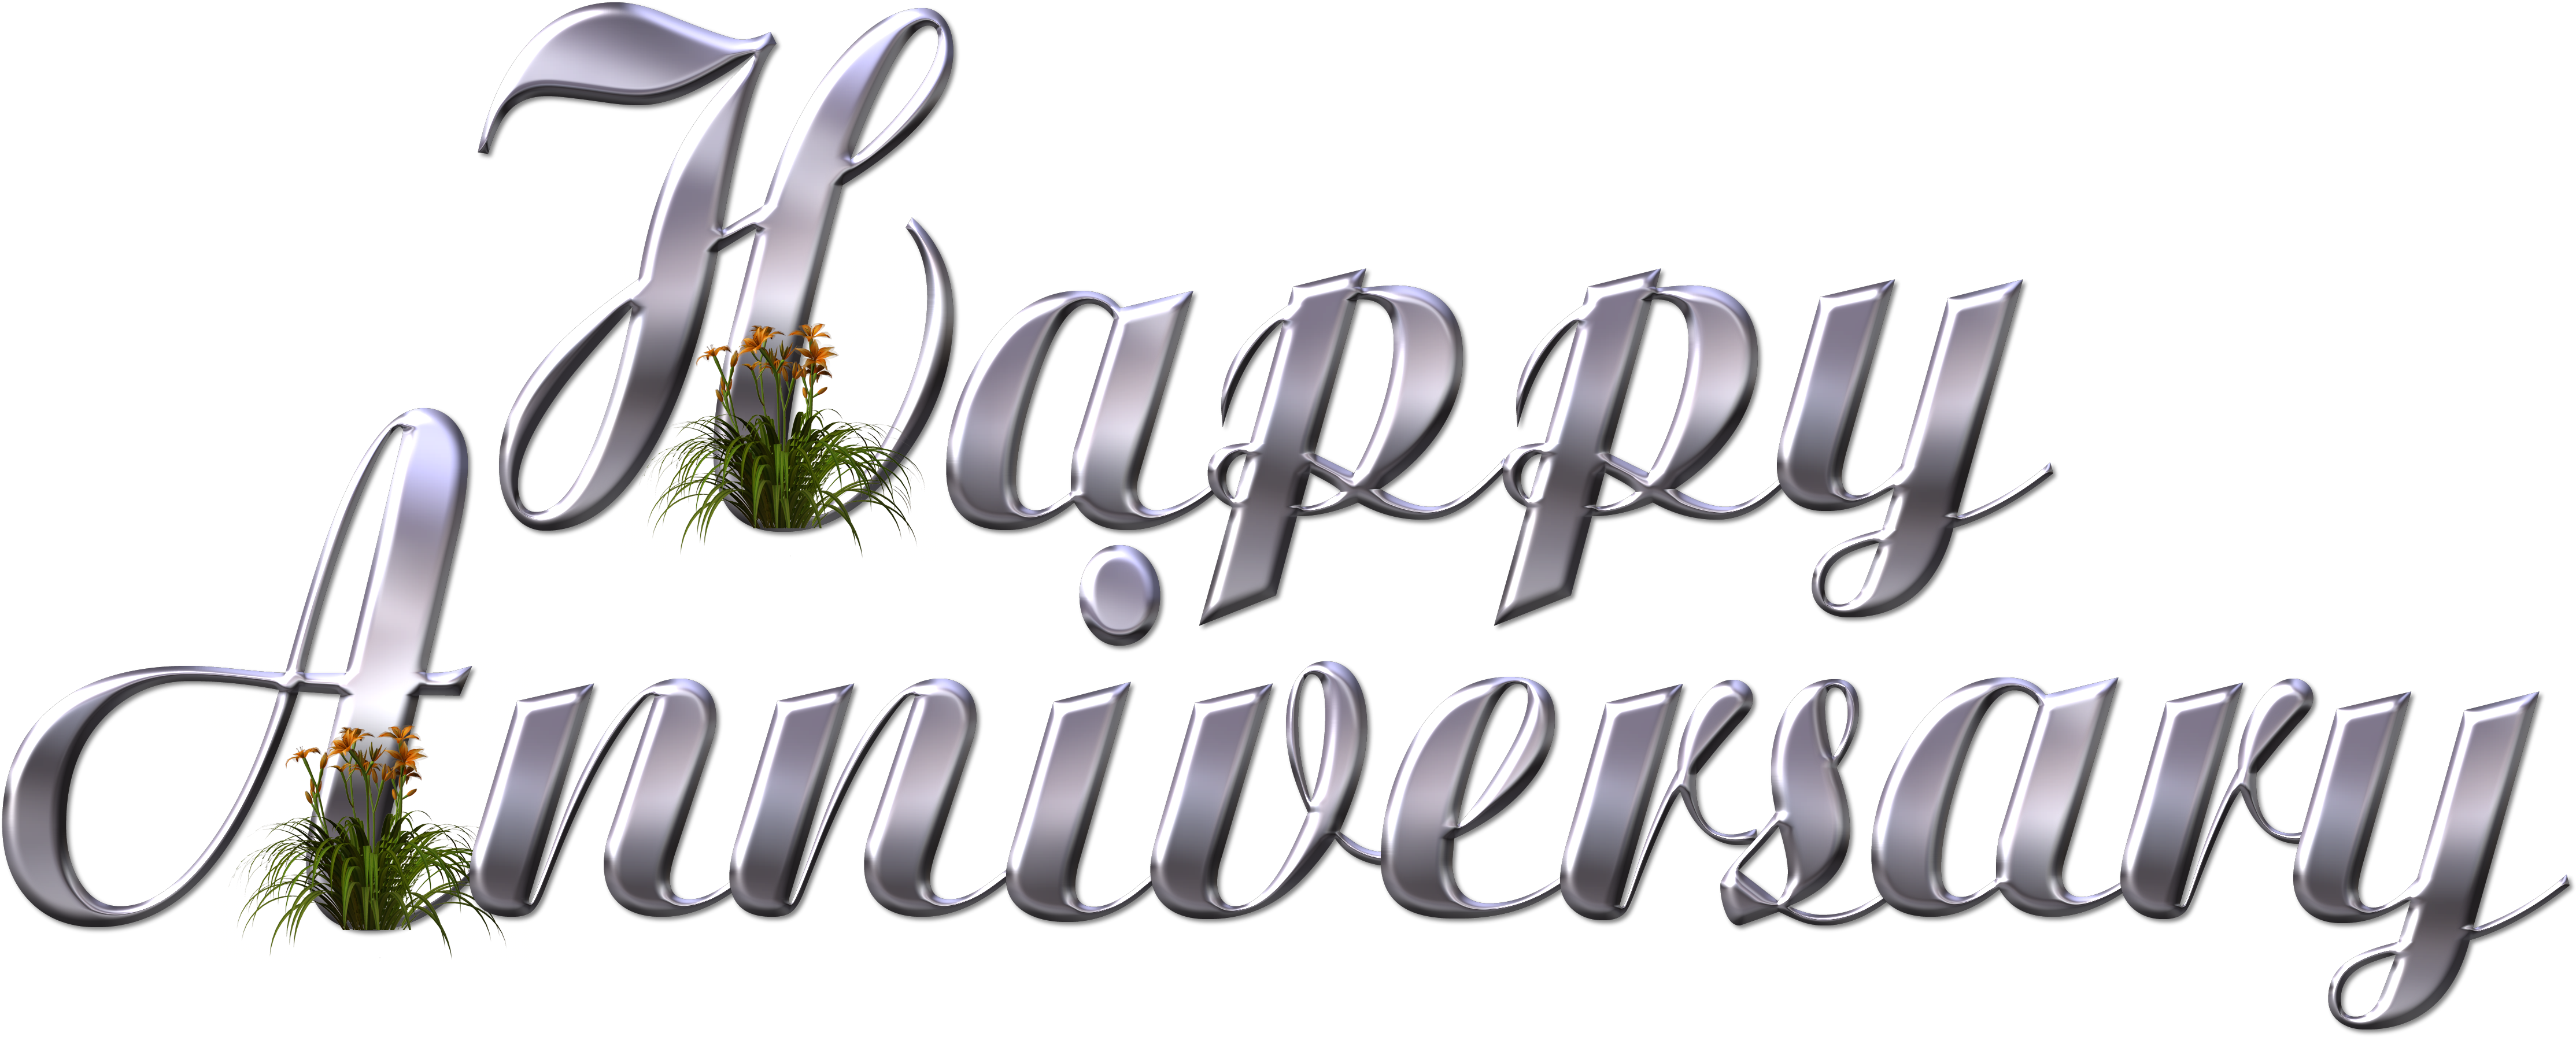 22 Reasons I Love My Wife - Happy Anniversary Text Png (4600x1900)